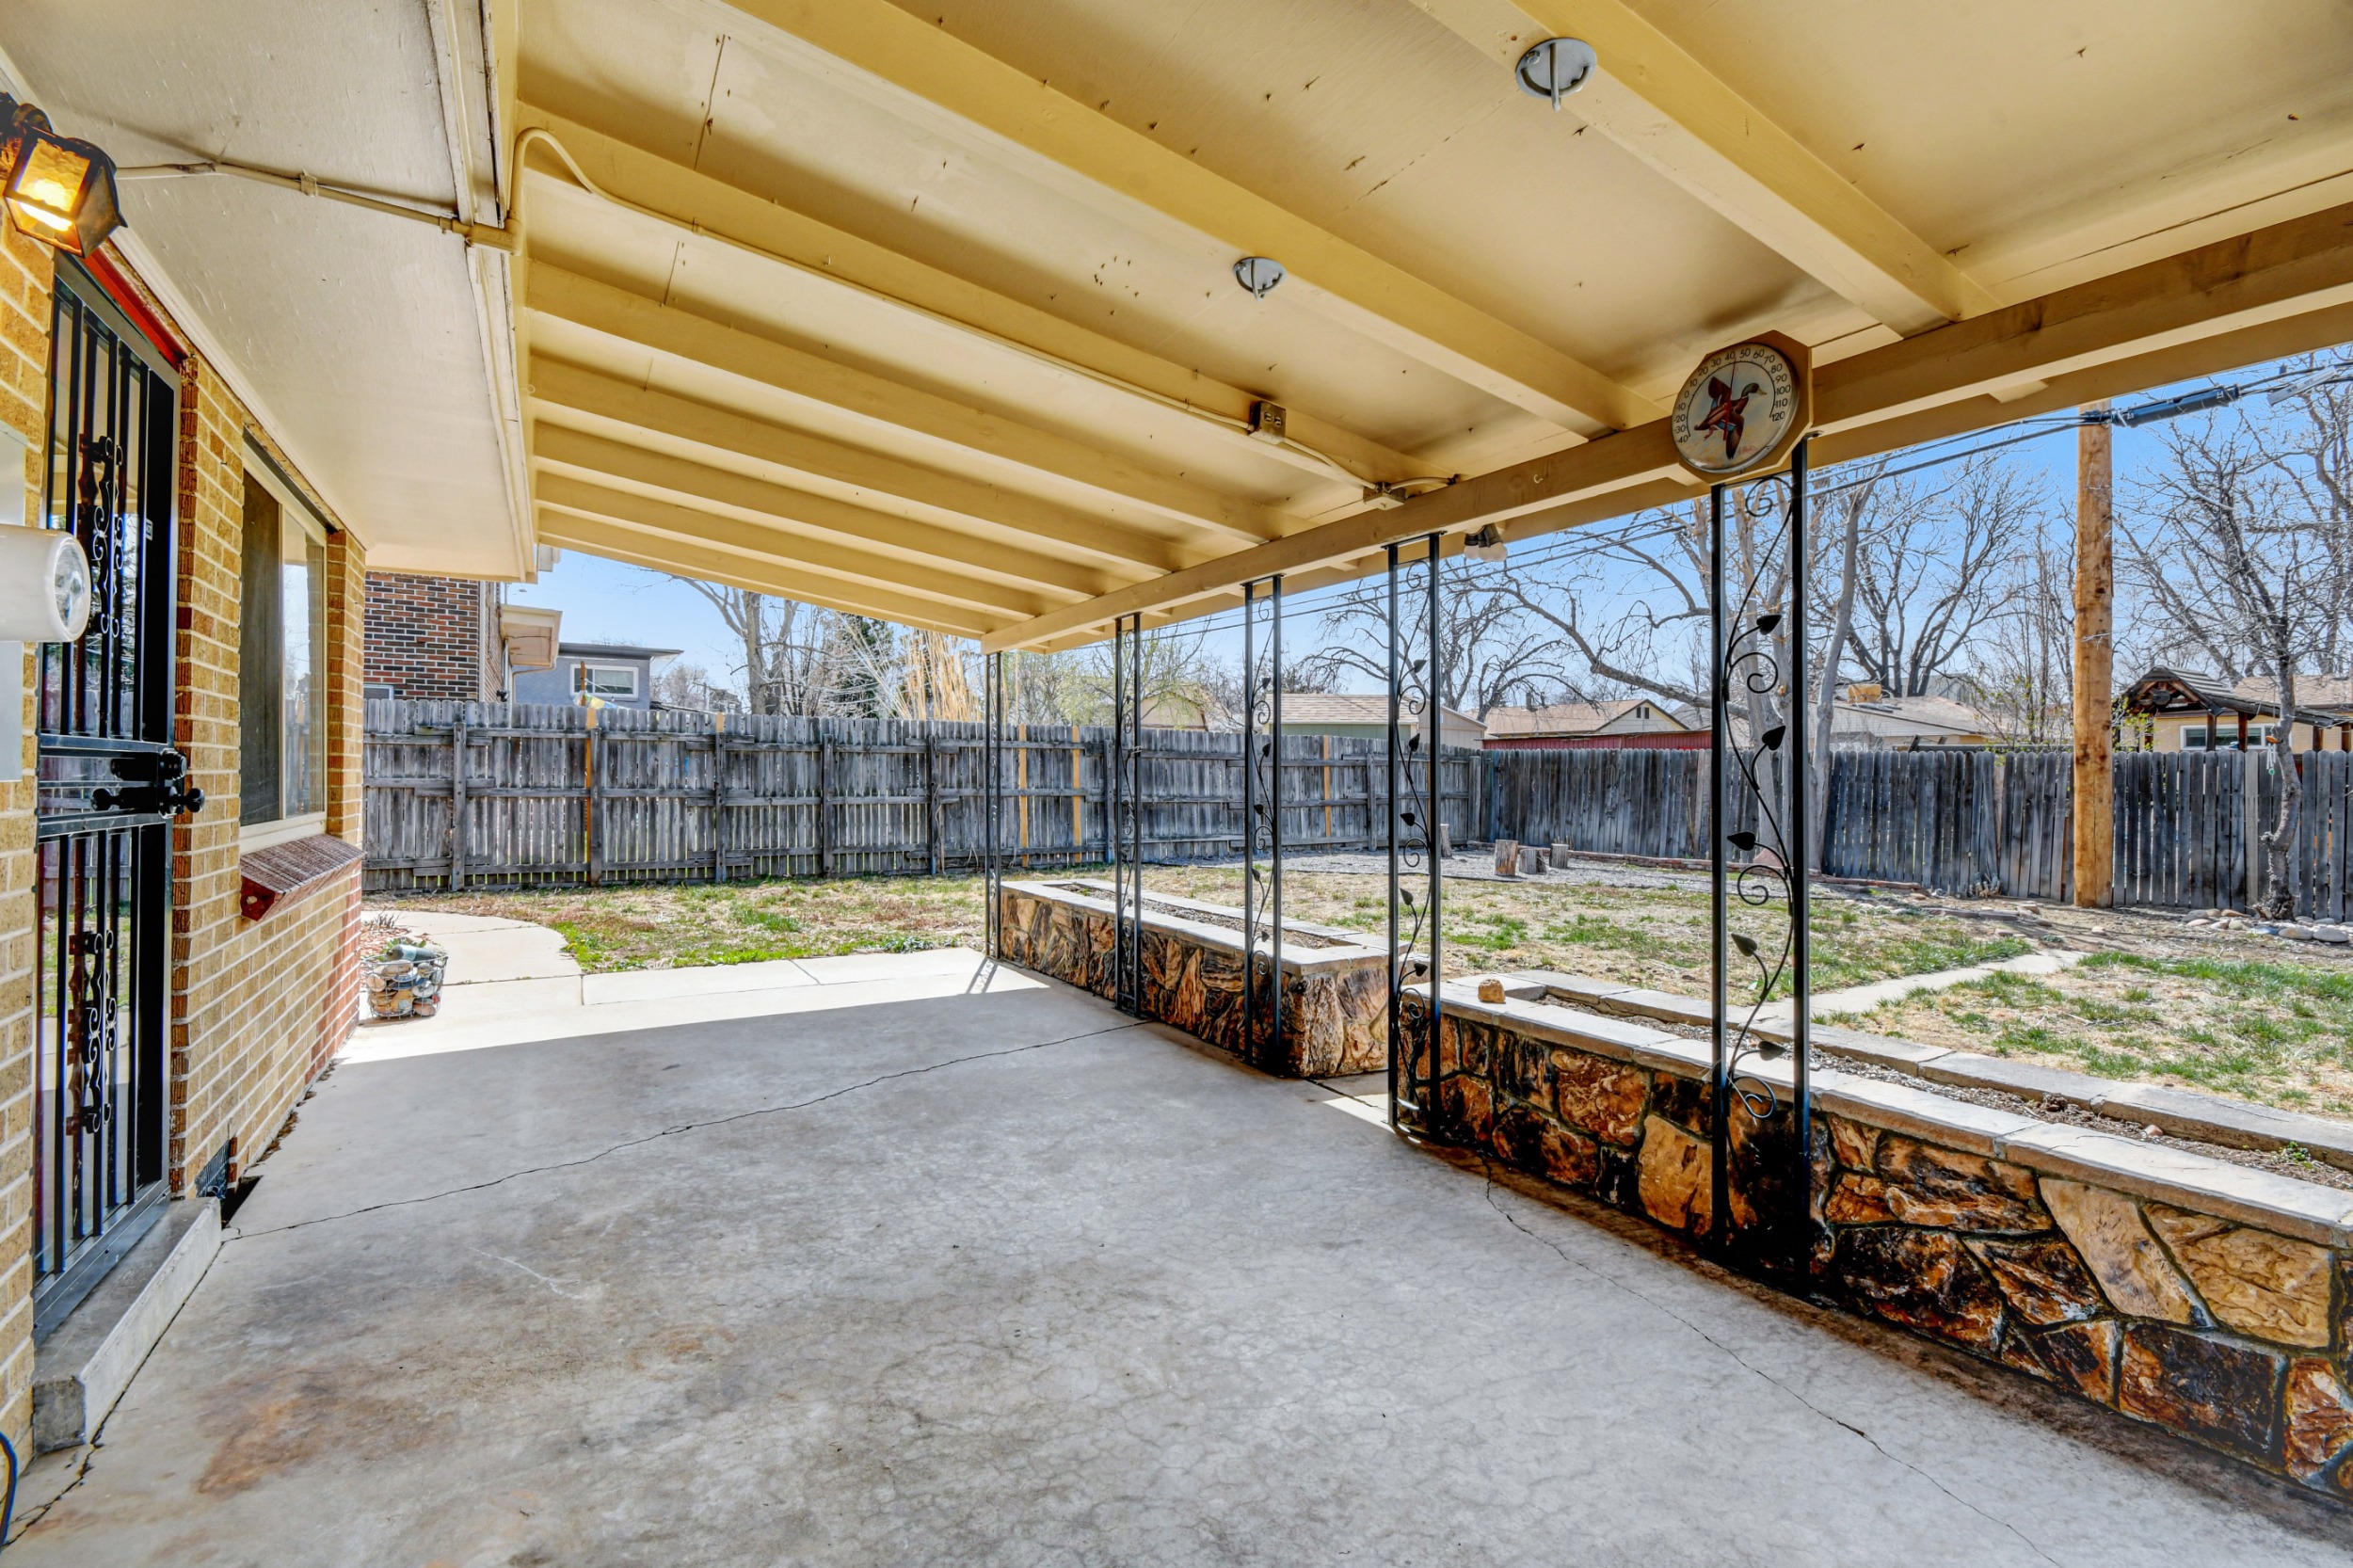 Covered Patio great for outdoor dining or just hanging out with friends and family